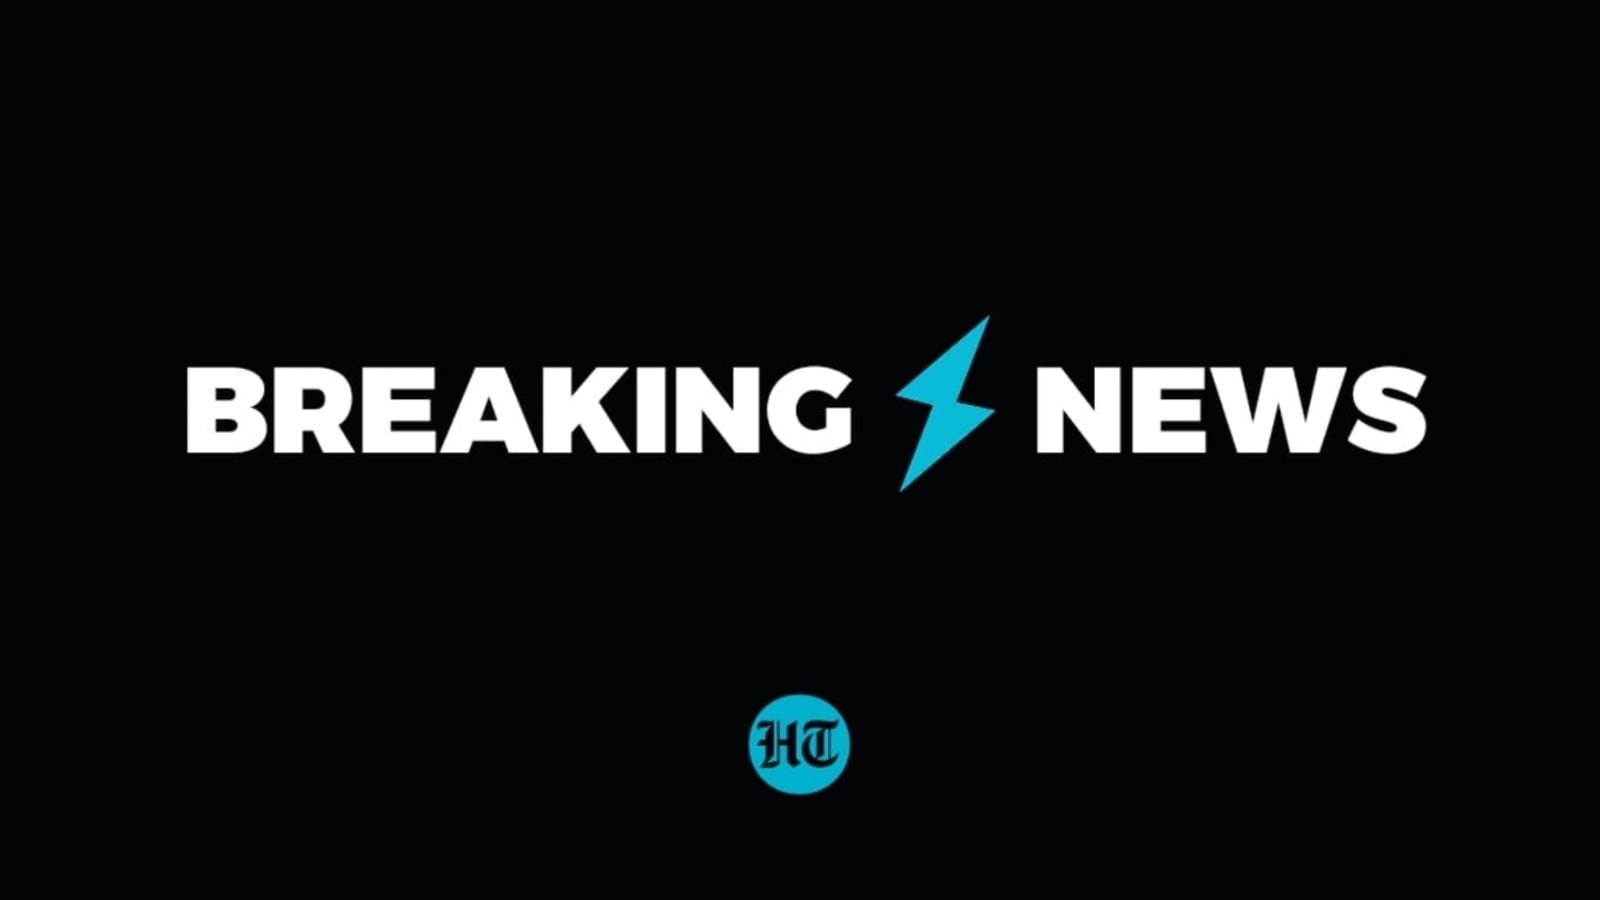 BREAKING: Ukranian civilian killed in frontline shelling, AFP reports citing officials